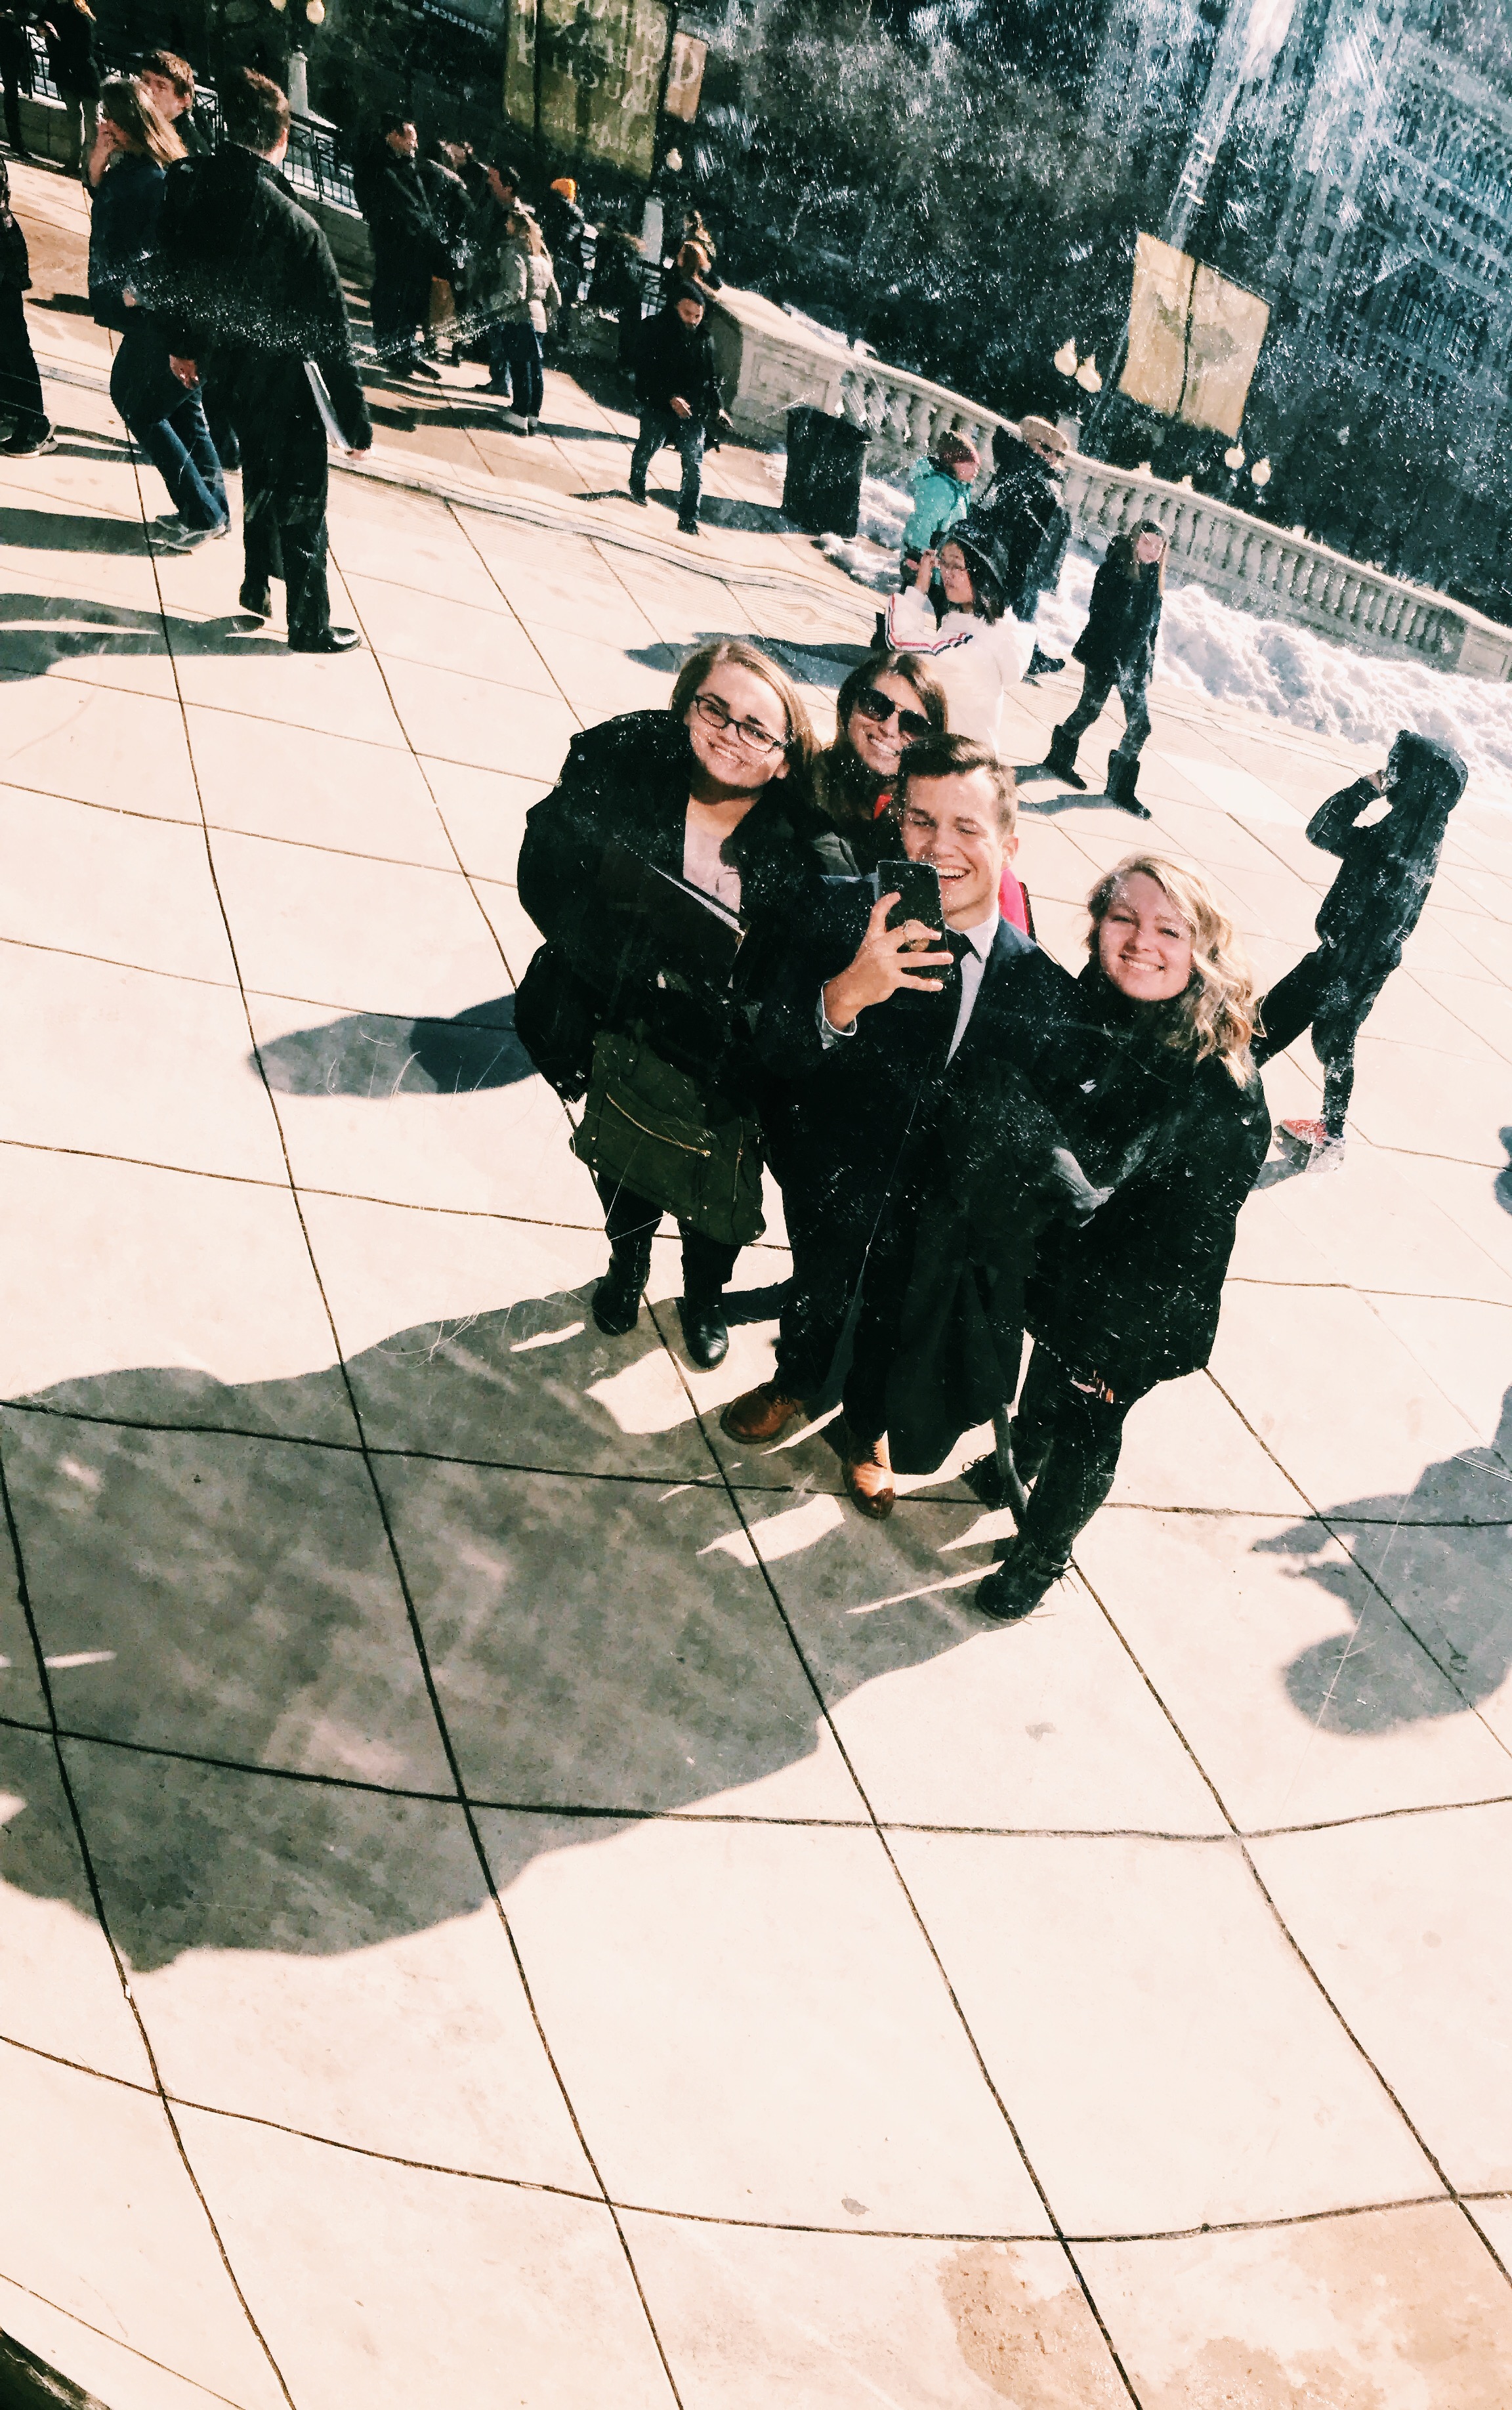 At "the bean" in Chicago